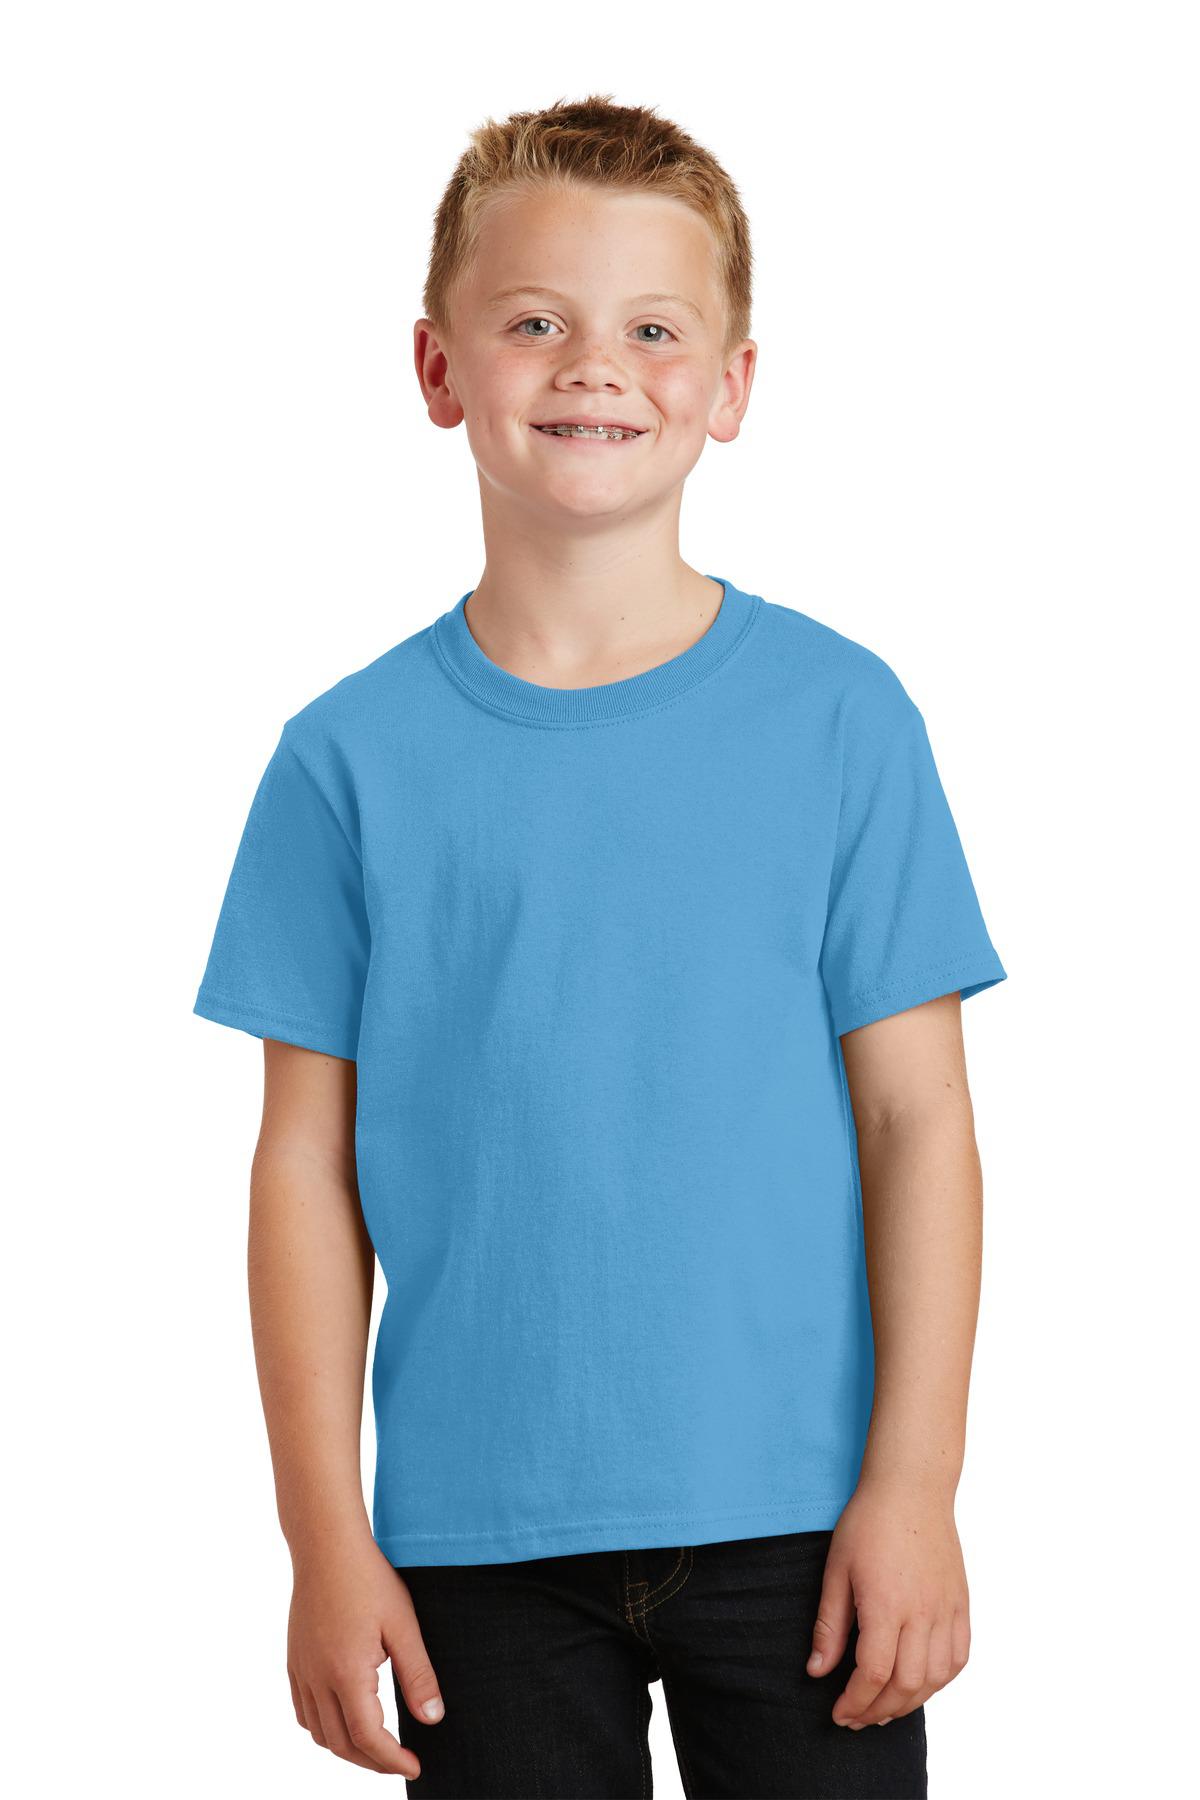 Port & Company PC54Y Youth Core Cotton Tee - Shirtmax